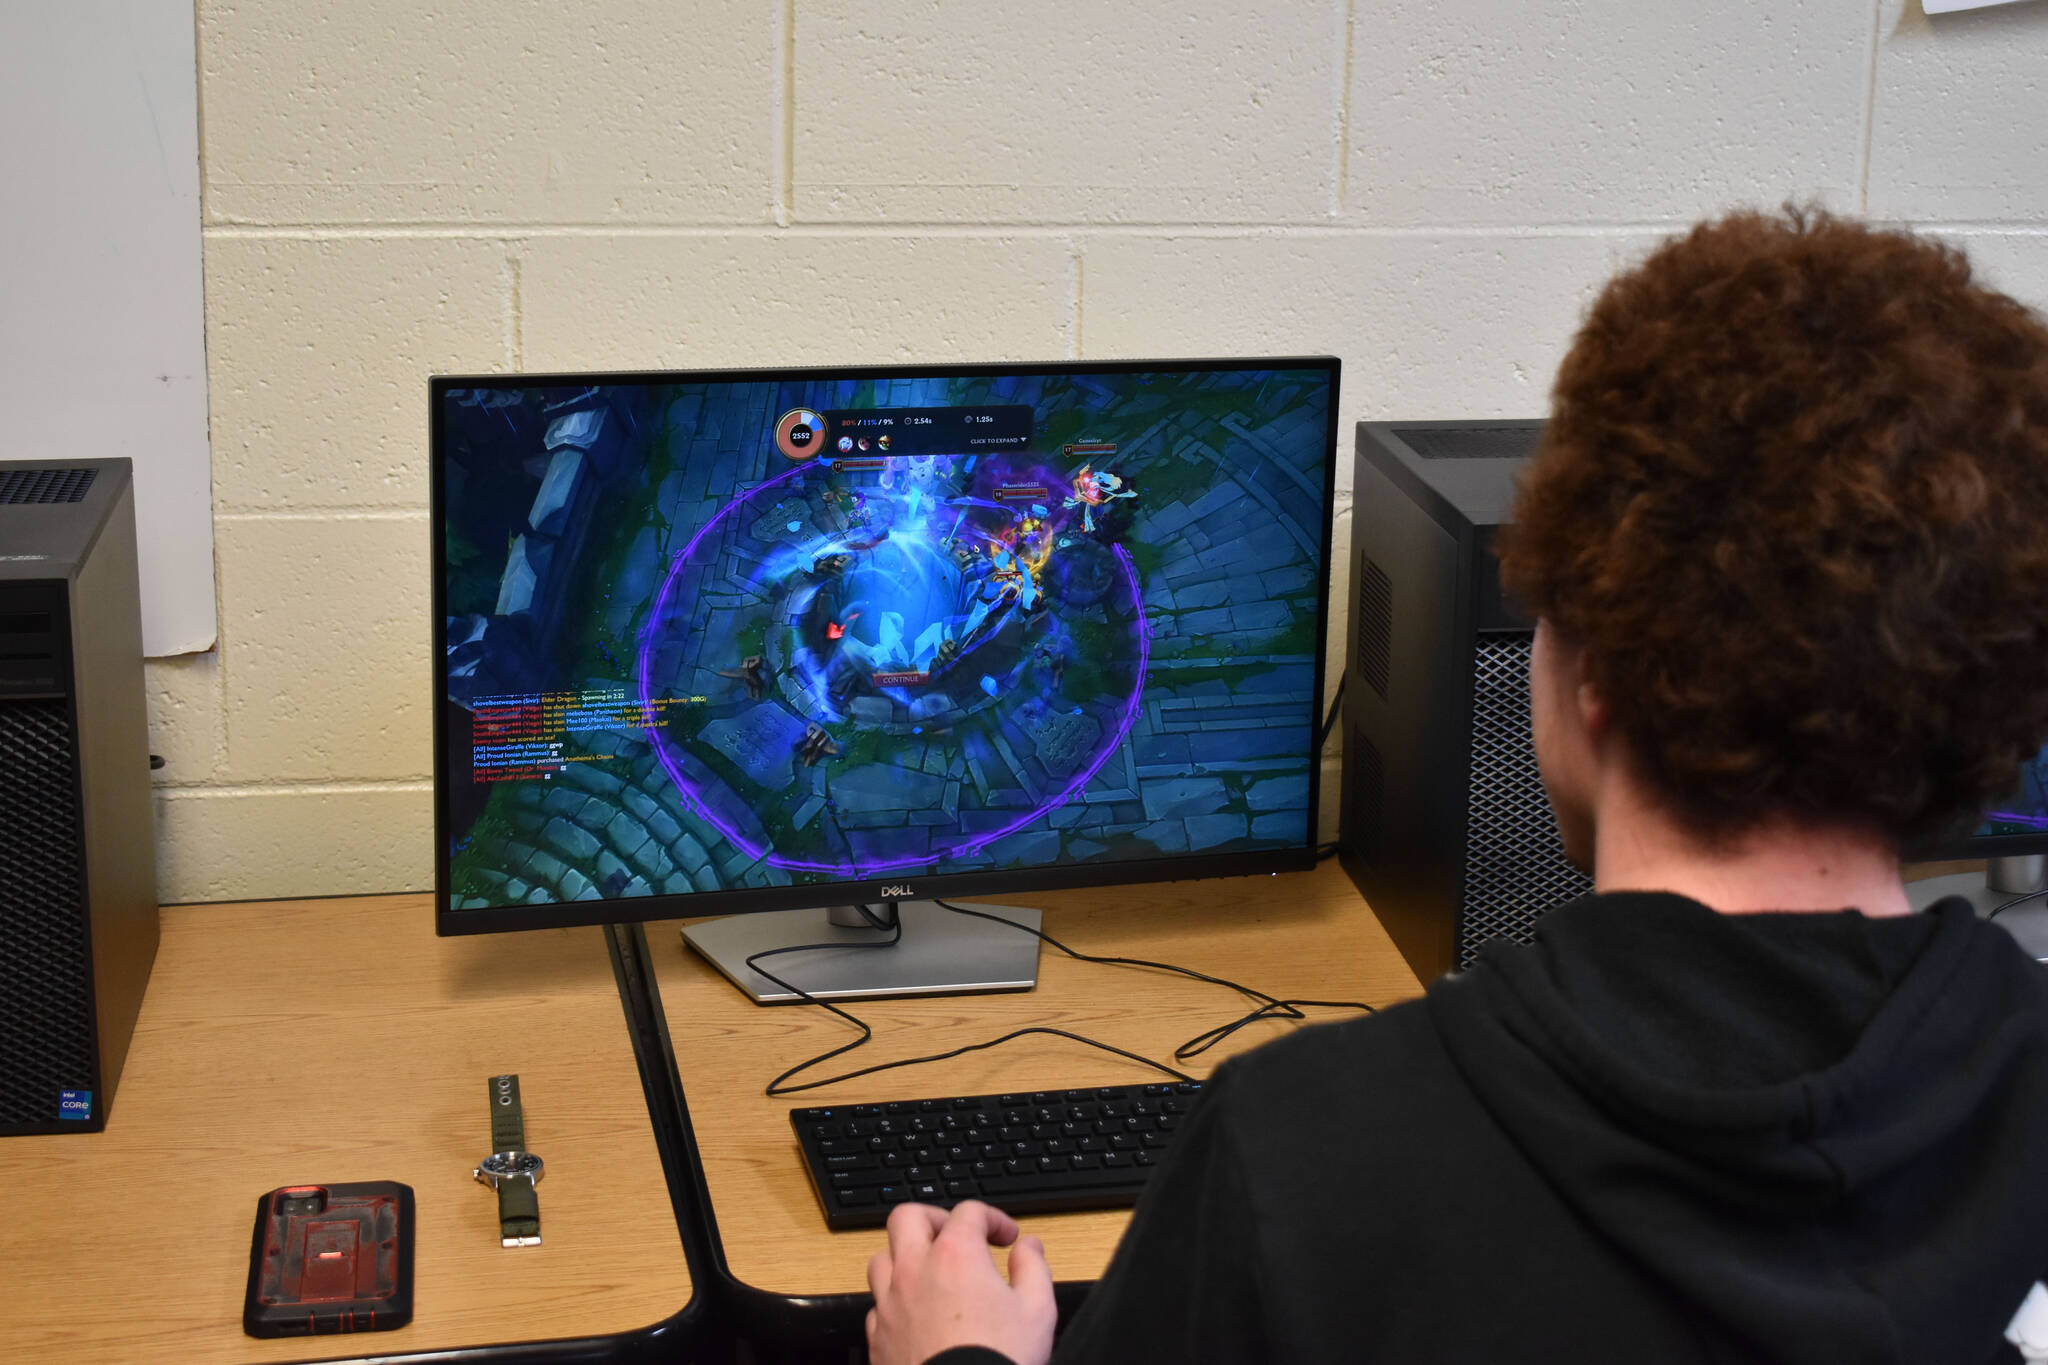 Kenai League of Legends team captain Silas Thibodeau watches the defeat animation as his nexus is destroyed during the first game on Tuesday, Sept. 27, 2022, at Kenai Central High School in Kenai, Alaska. (Jake Dye/Peninsula Clarion)